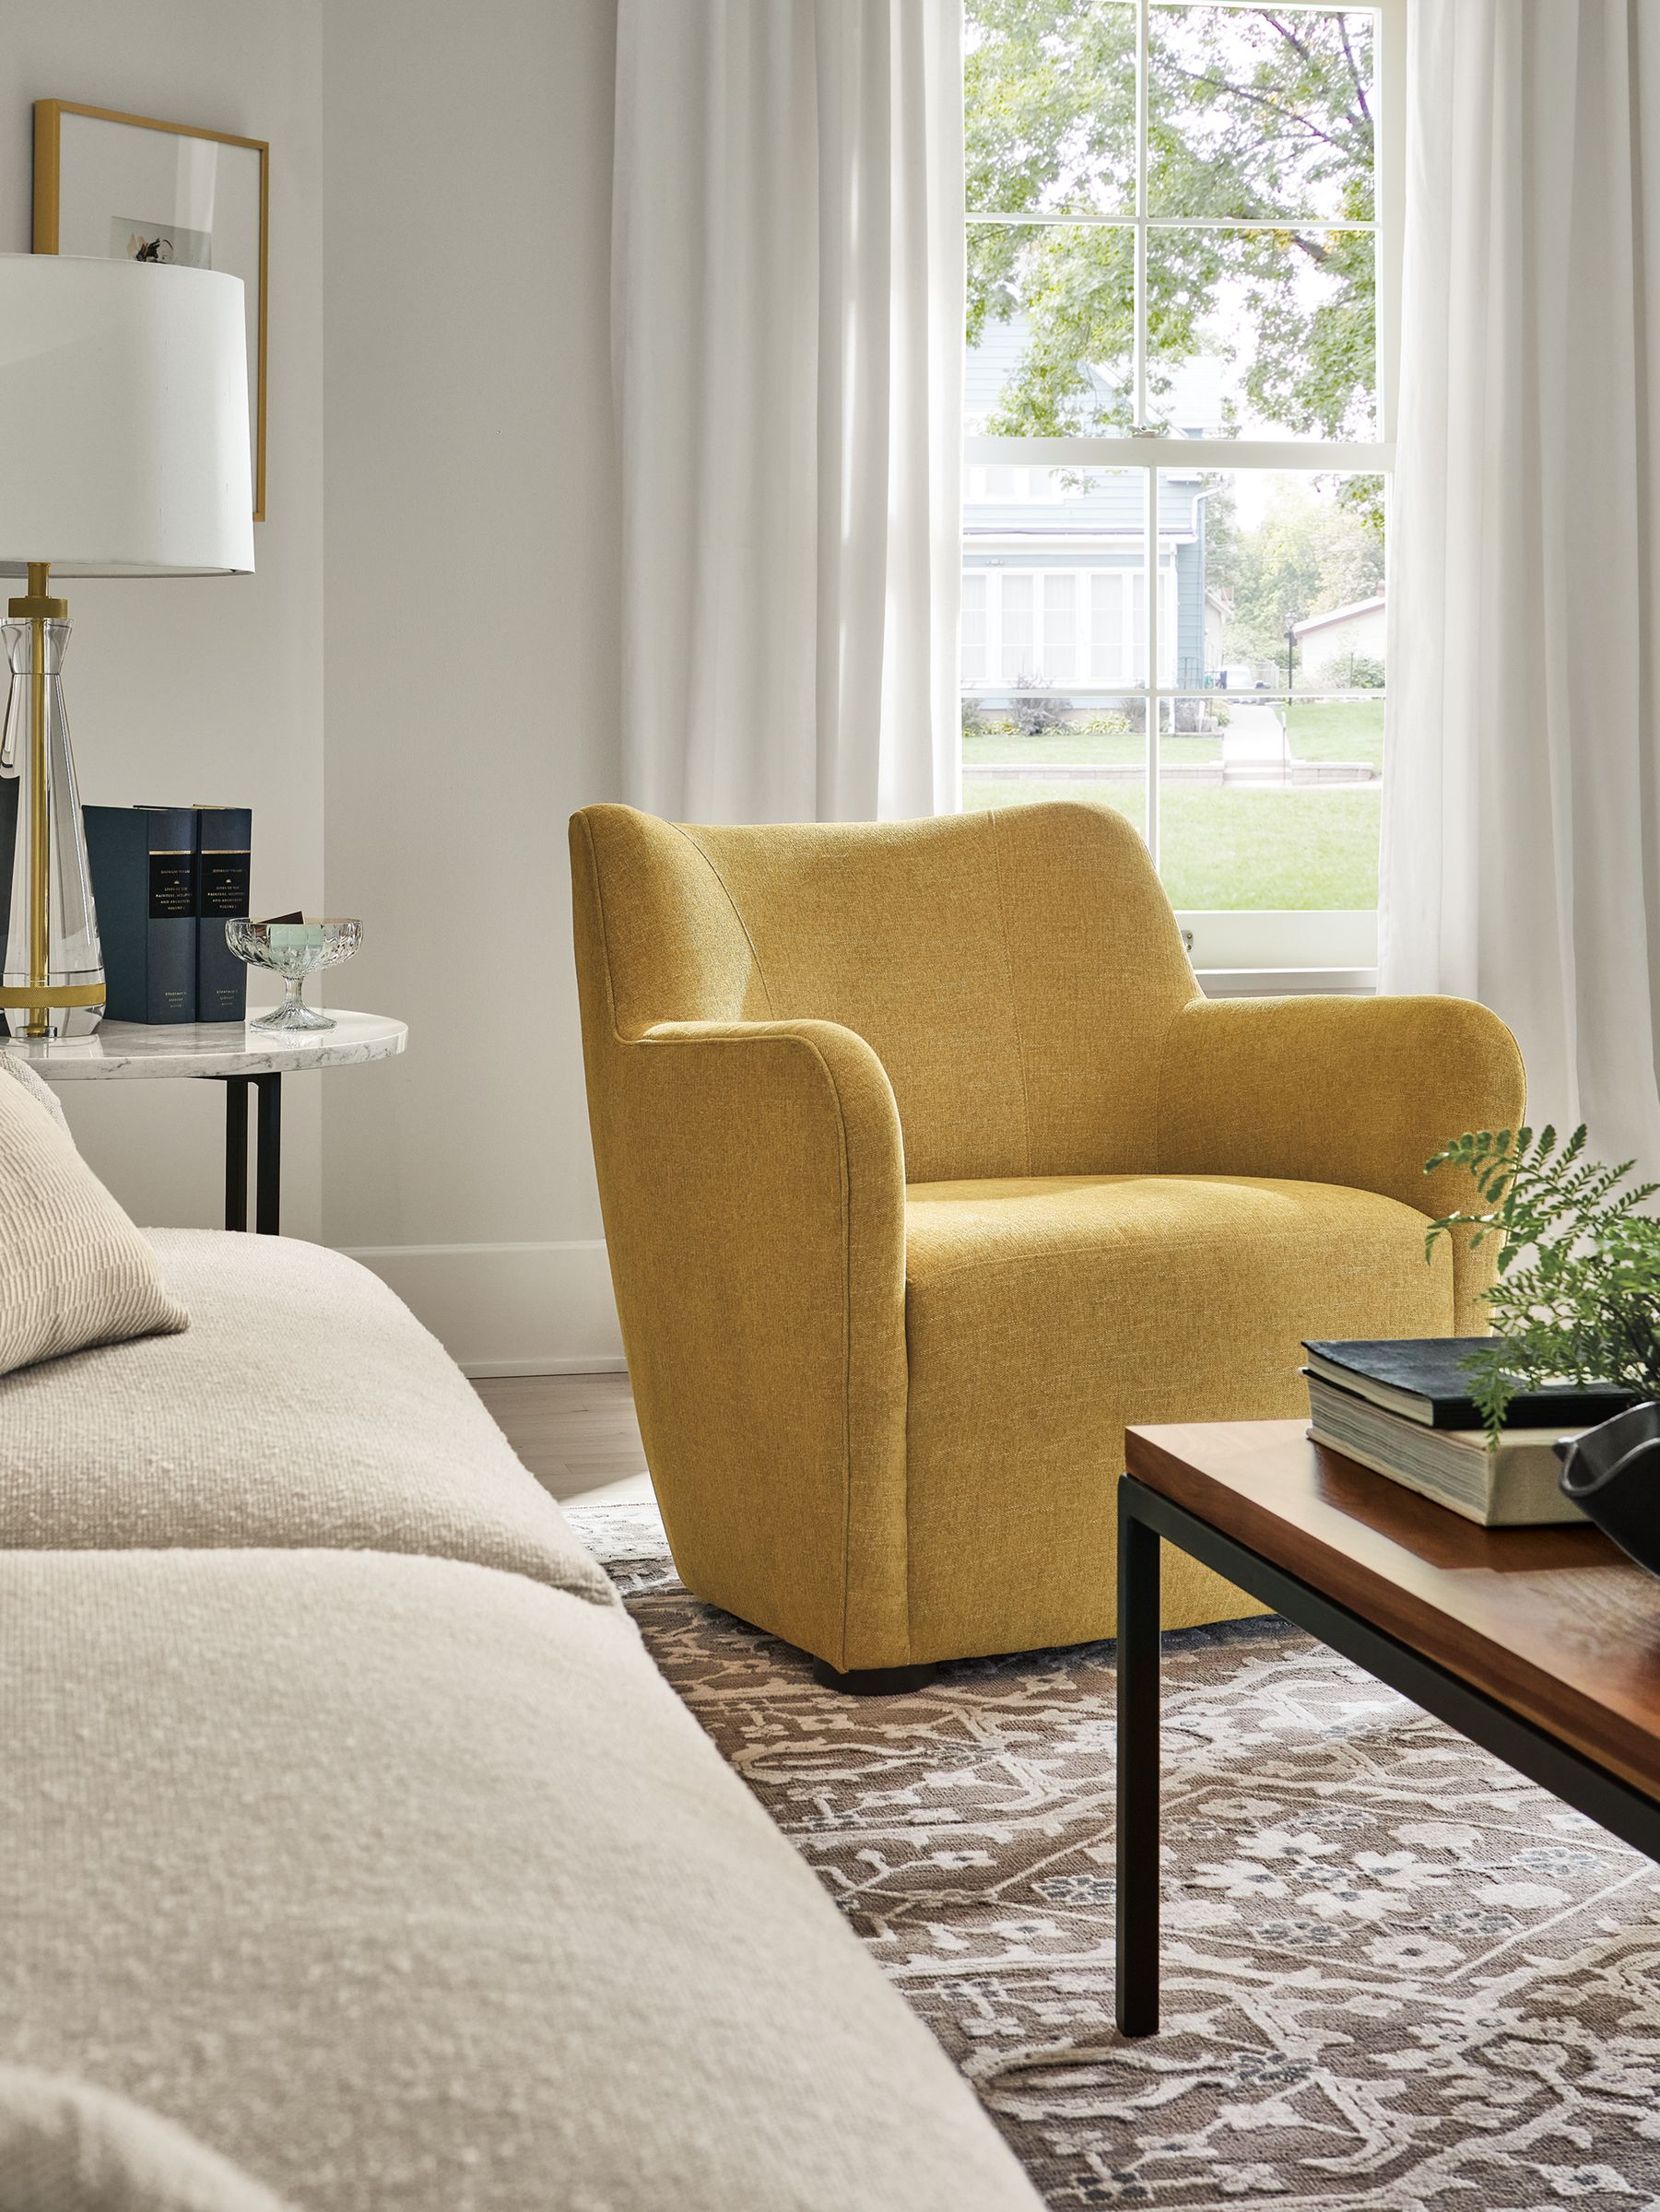 living room with lily chair in hawkins mustard fabric, vanya rug, parsons coffee table, gatsby table lamp.